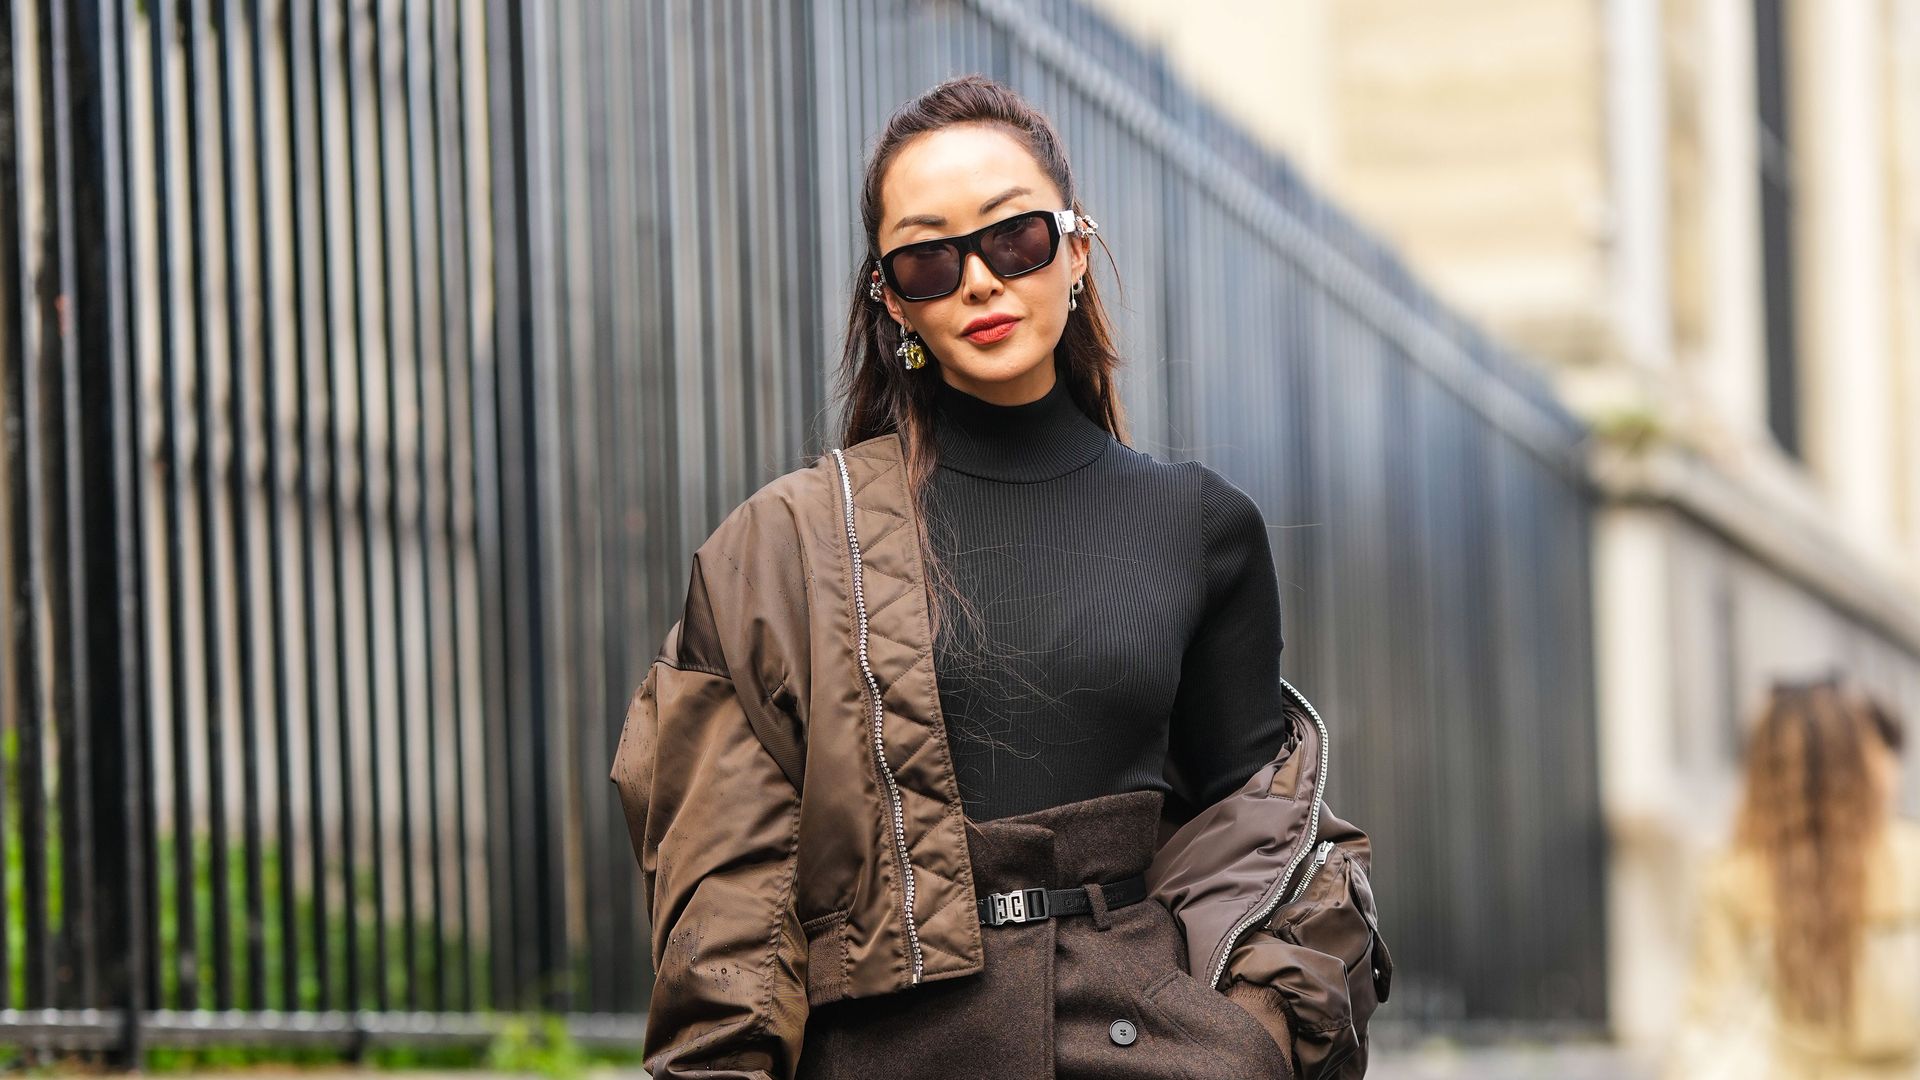 15 bomber jackets to add into your cool-girl uniform